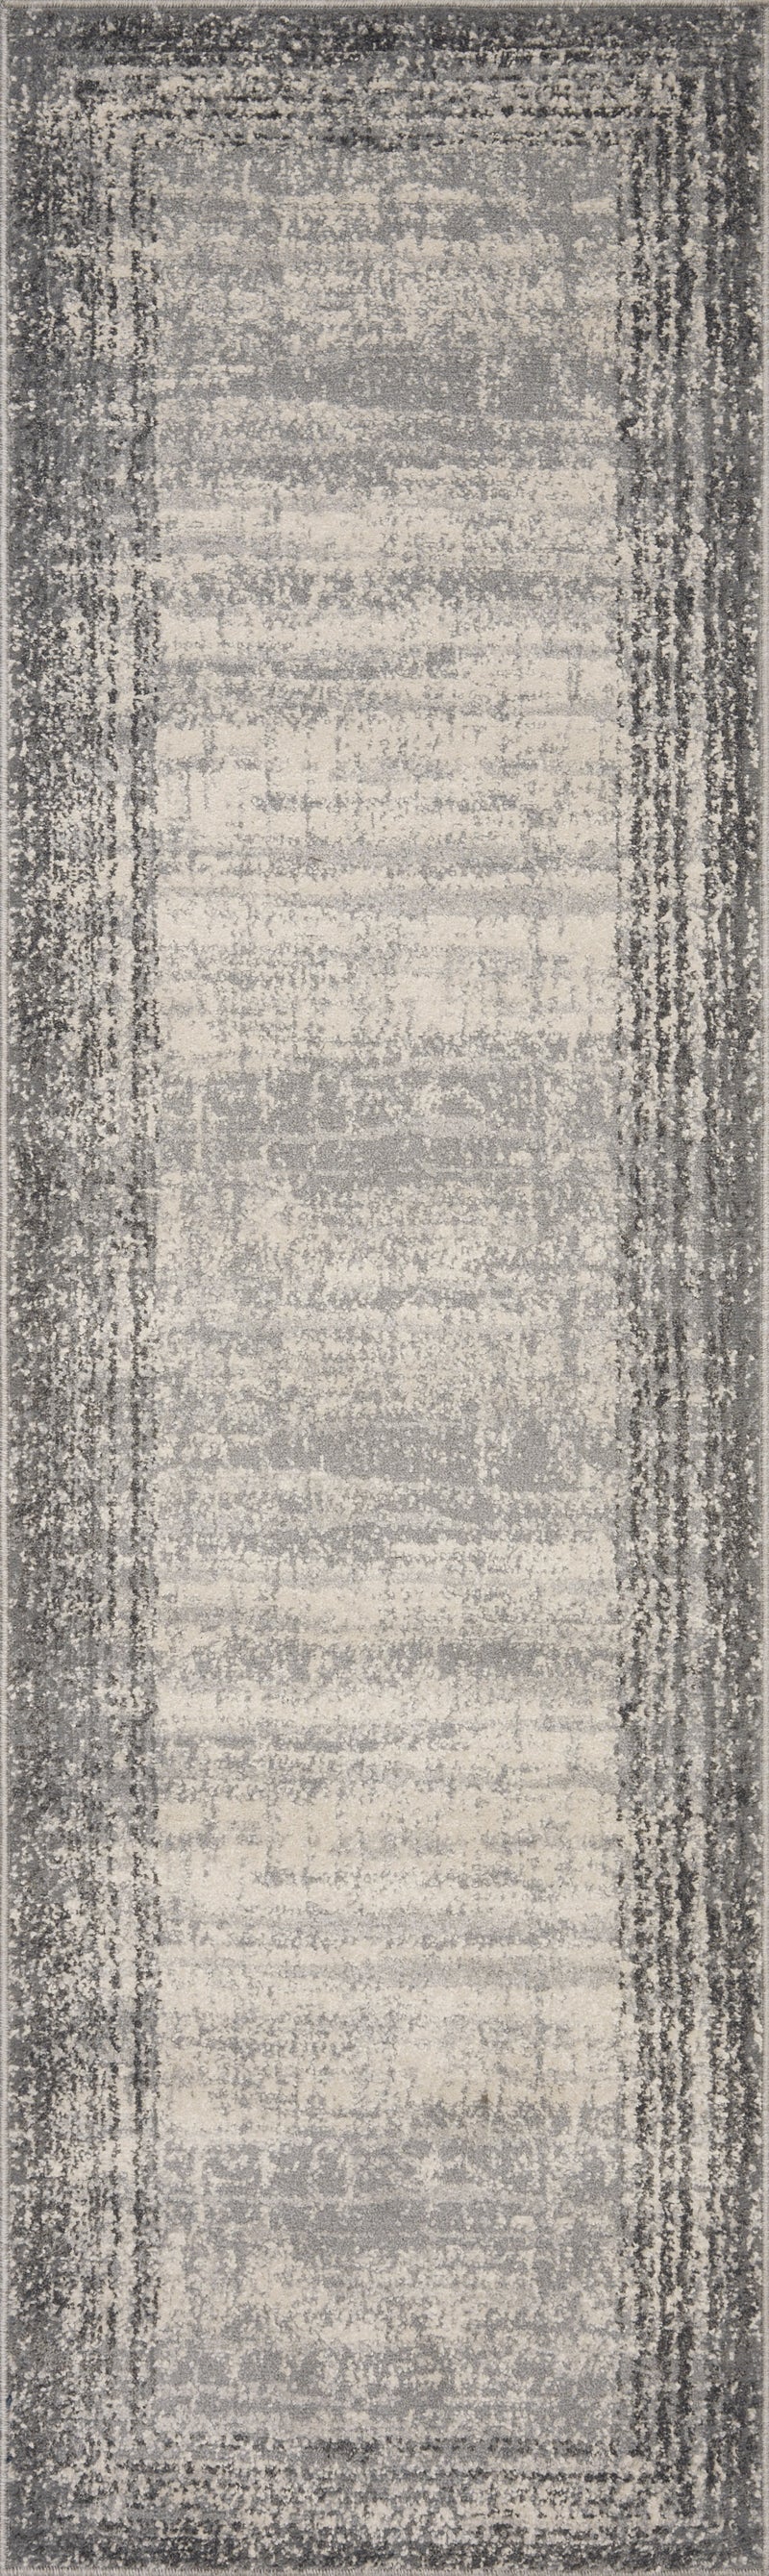 media image for Austen Rug in Pebble / Charcoal by Loloi II 217